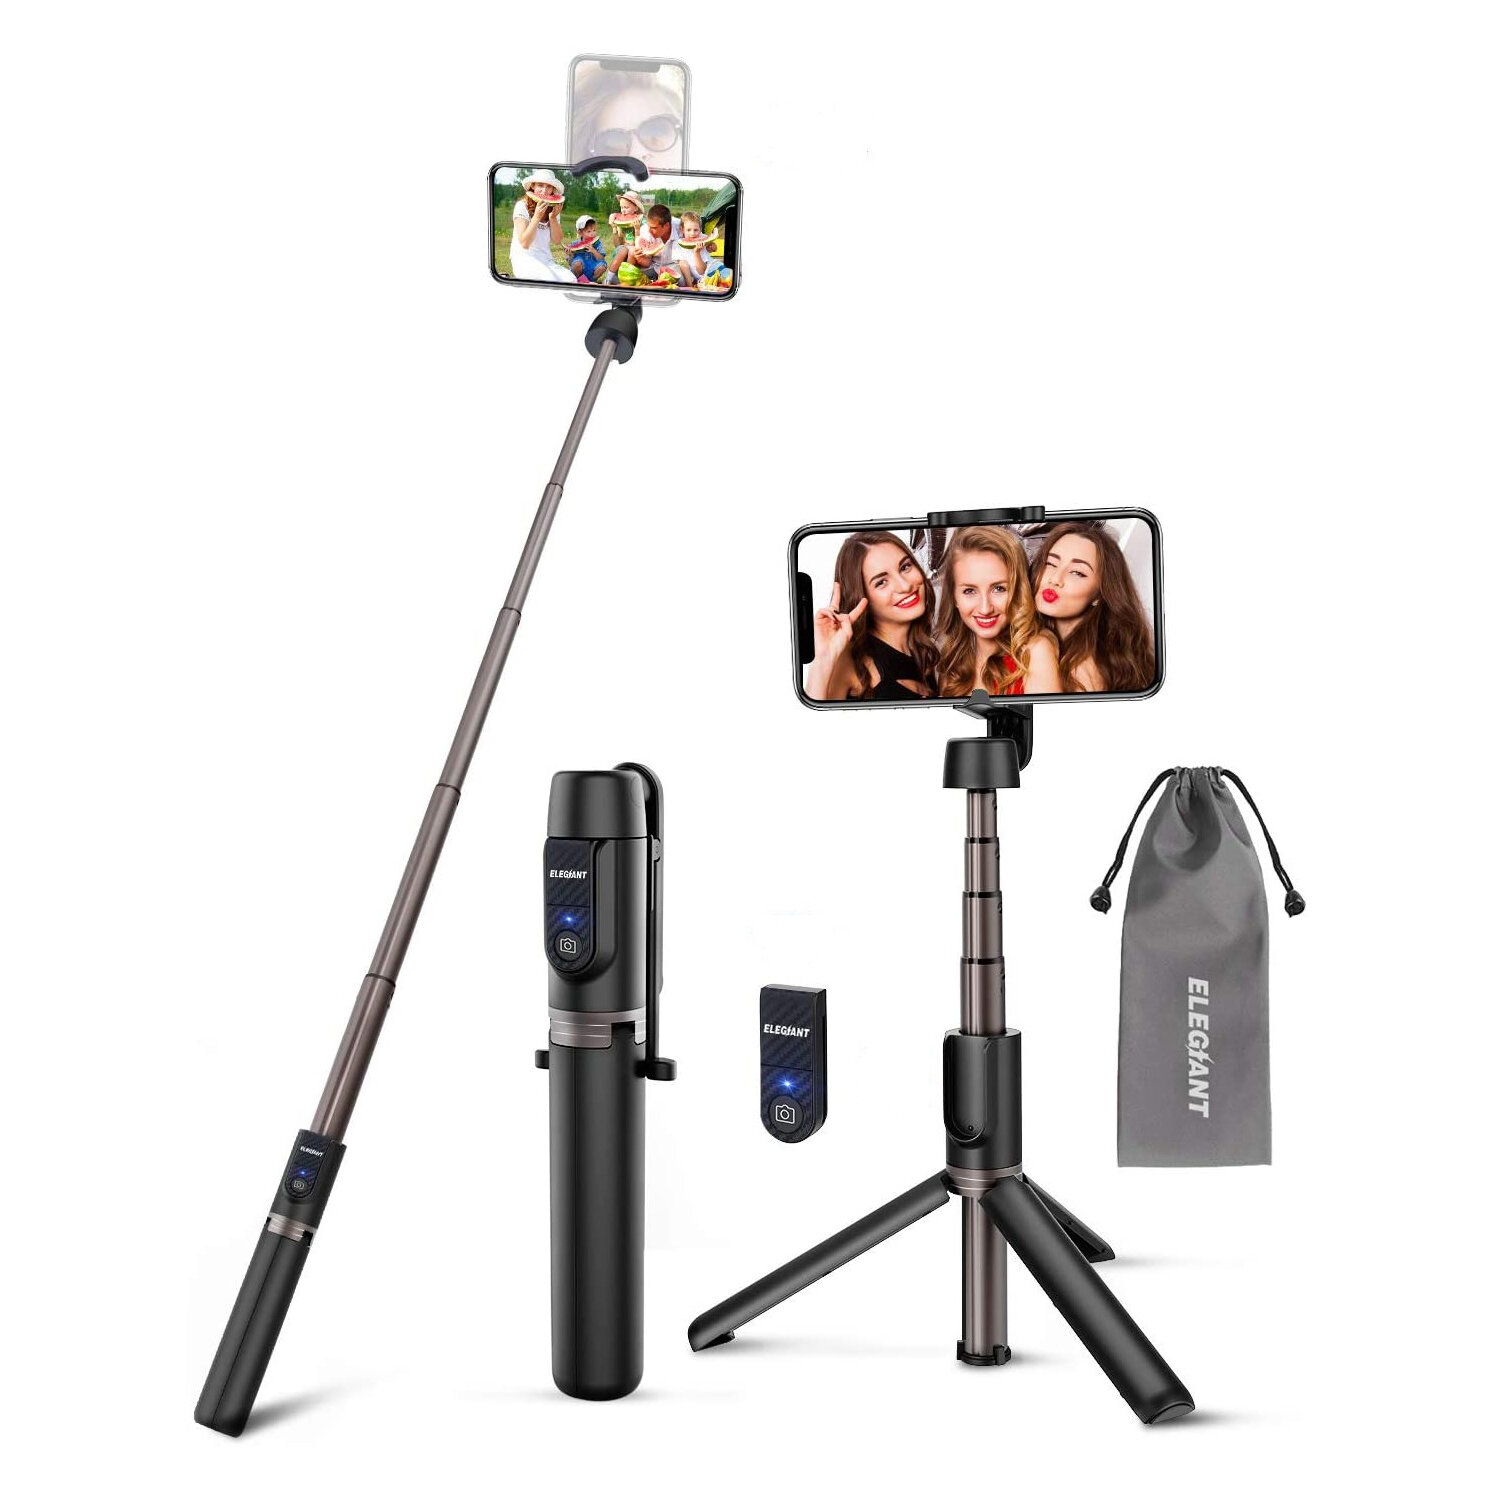 

ELEGIANT 2 in1 Extendable Remote Control Selfie Stick Tripod Mobile Selfie Stick with bluetooth Shutter and Phone Holder